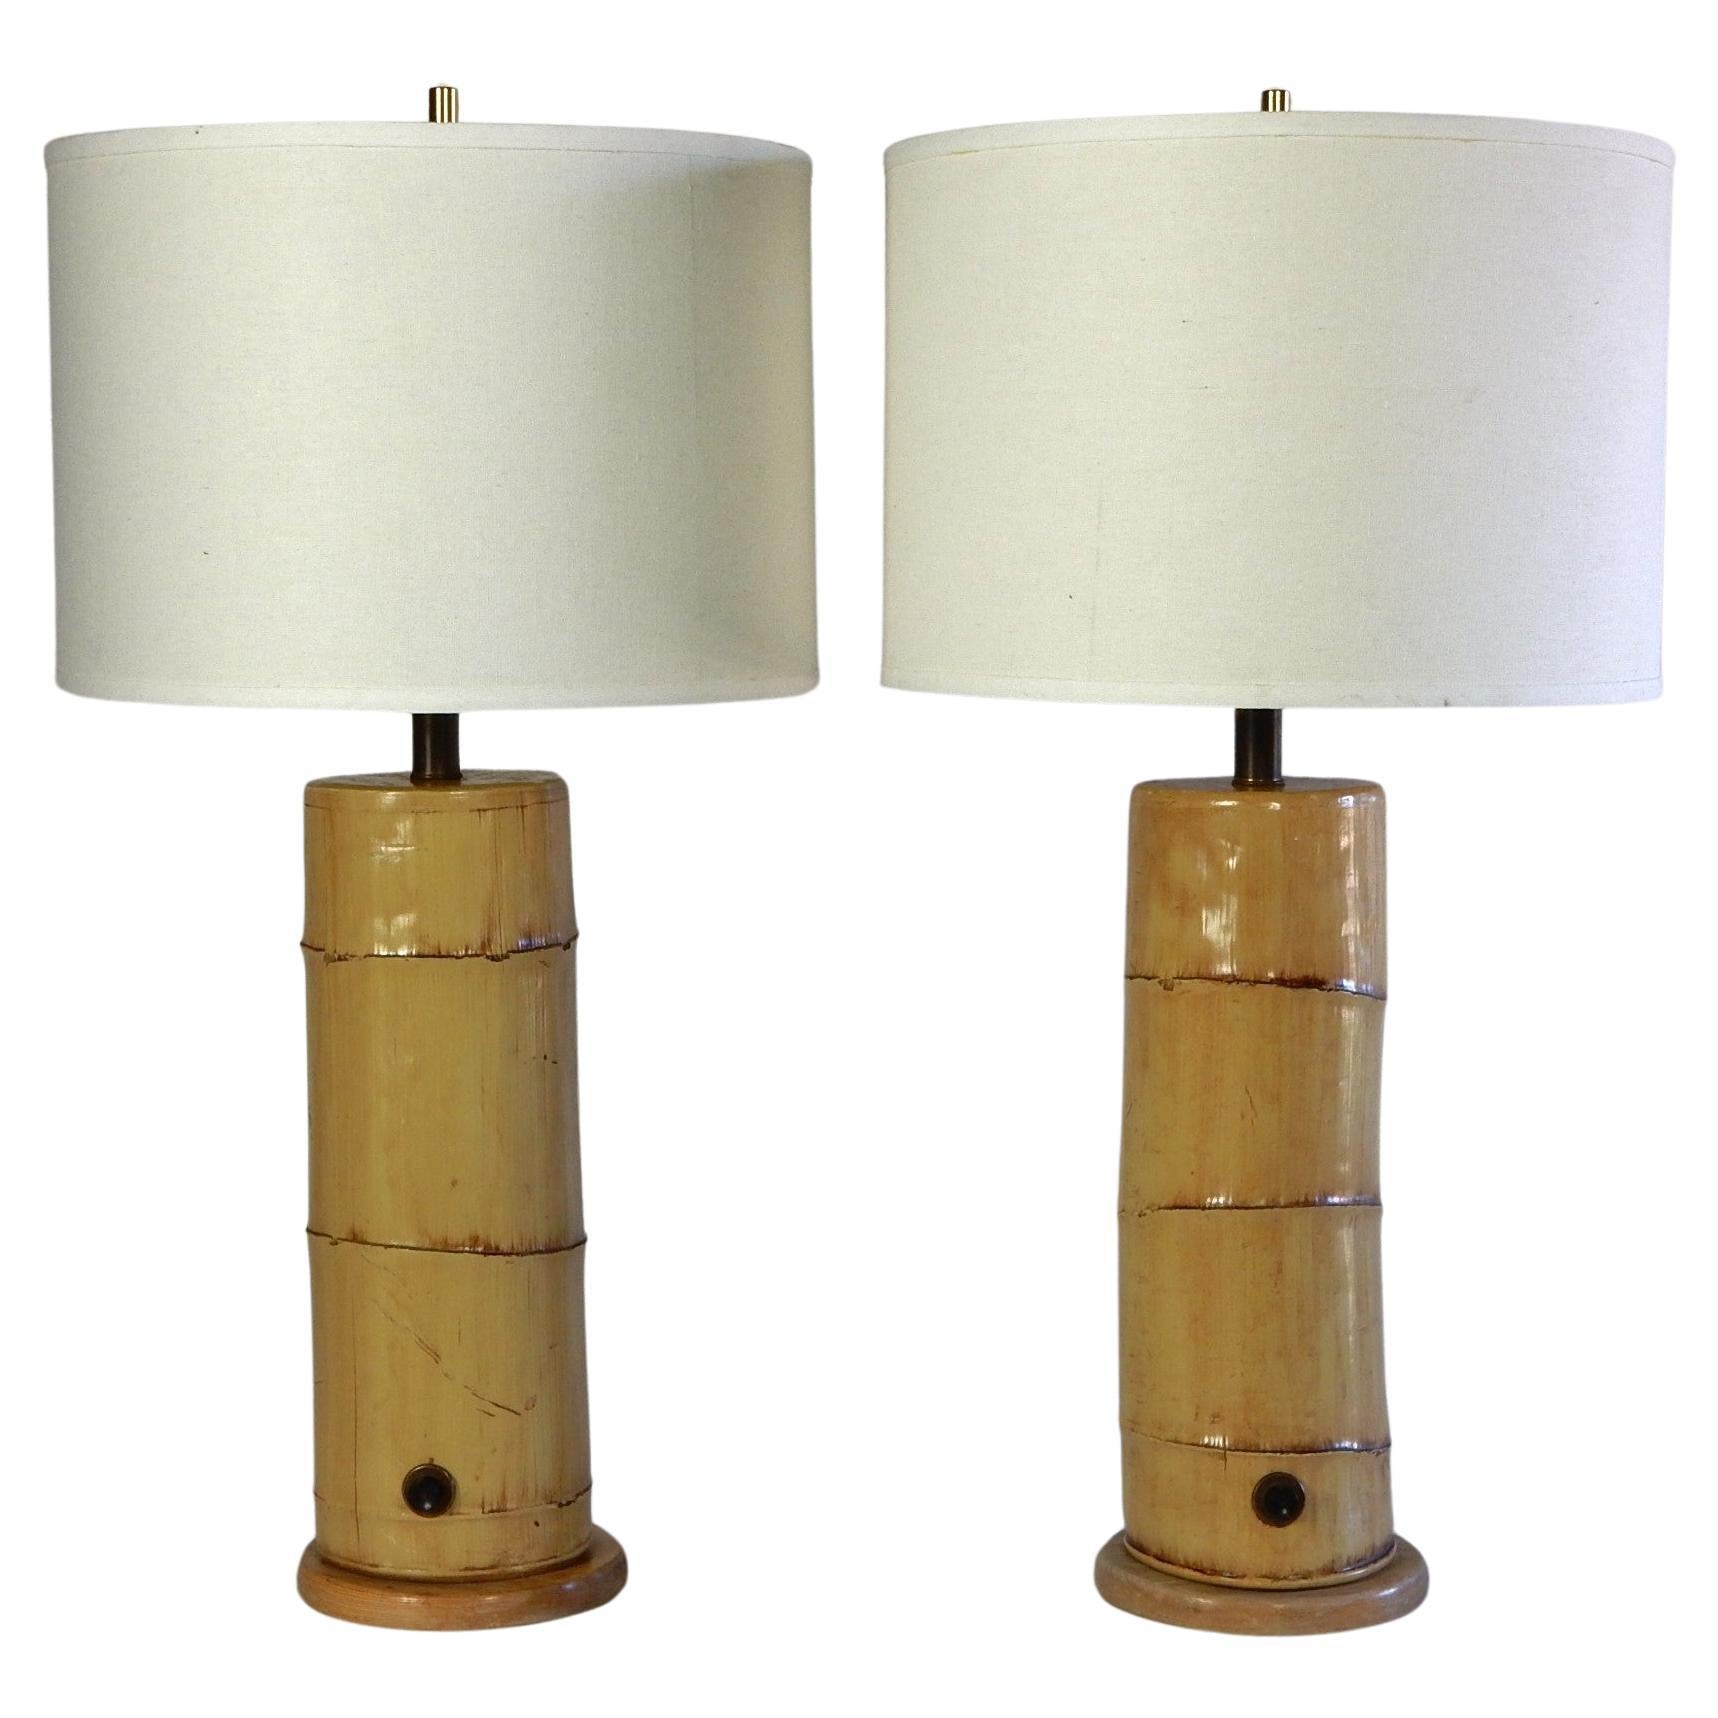 Vintage Faux Bamboo Plaster Table Lamps from the Moana Hotel, Hawaii 1960's For Sale